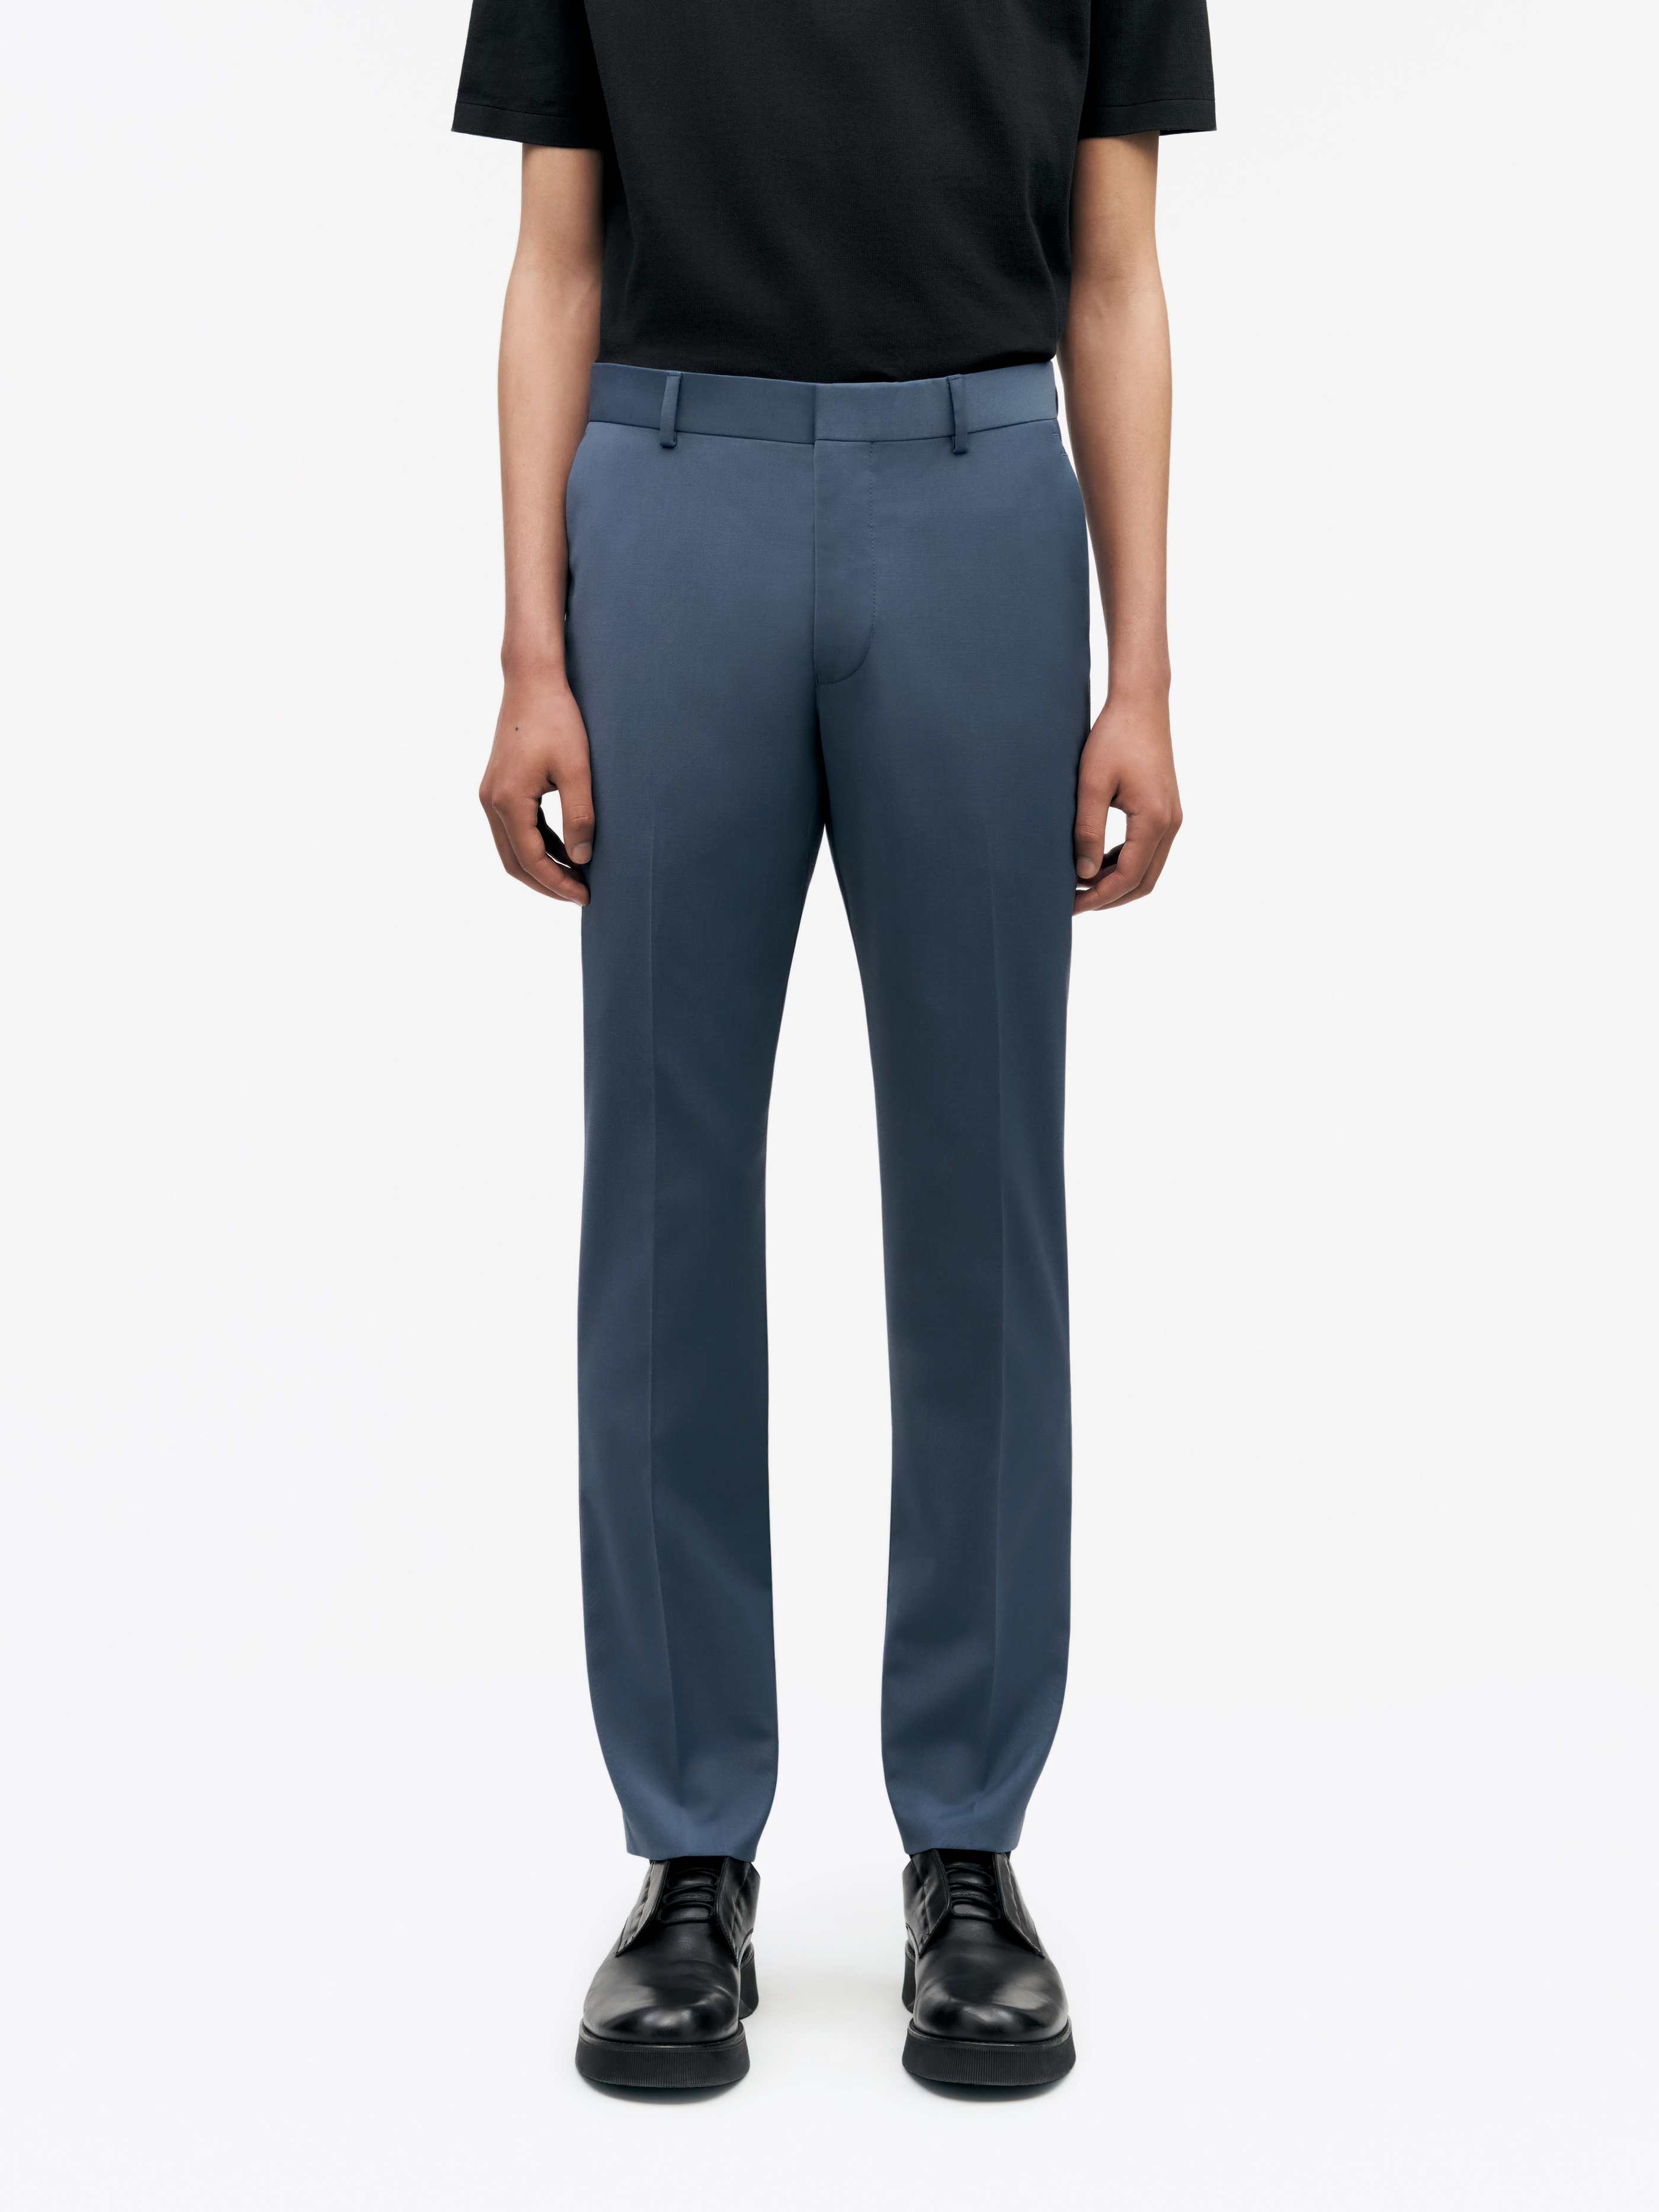 TIGER OF SWEDEN Tenutas Trousers in Blue T70699019 22L-SMOKEY BLUE FROM EIGHTYWINGOLD - OFFICIAL BRAND PARTNER